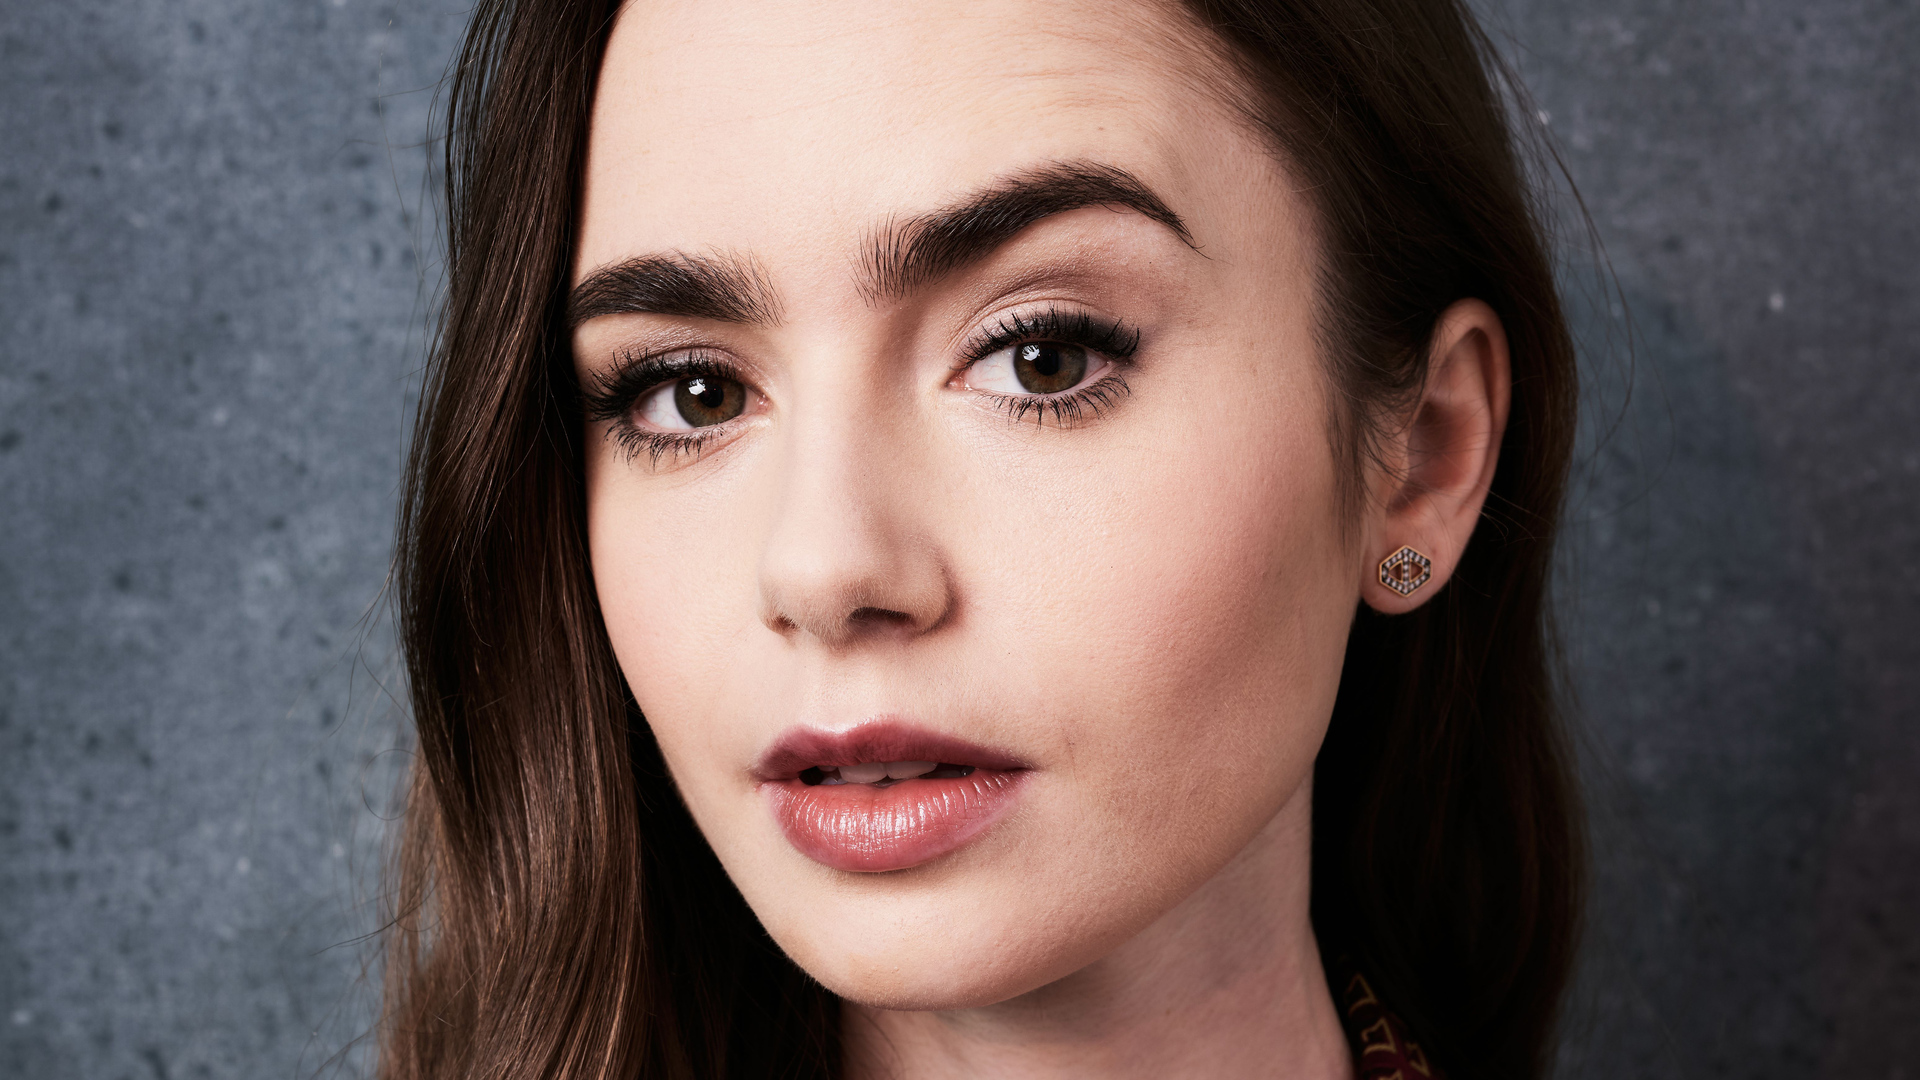 Lily Collins 5k 2019 Wallpaper In 1920x1080 Resolution